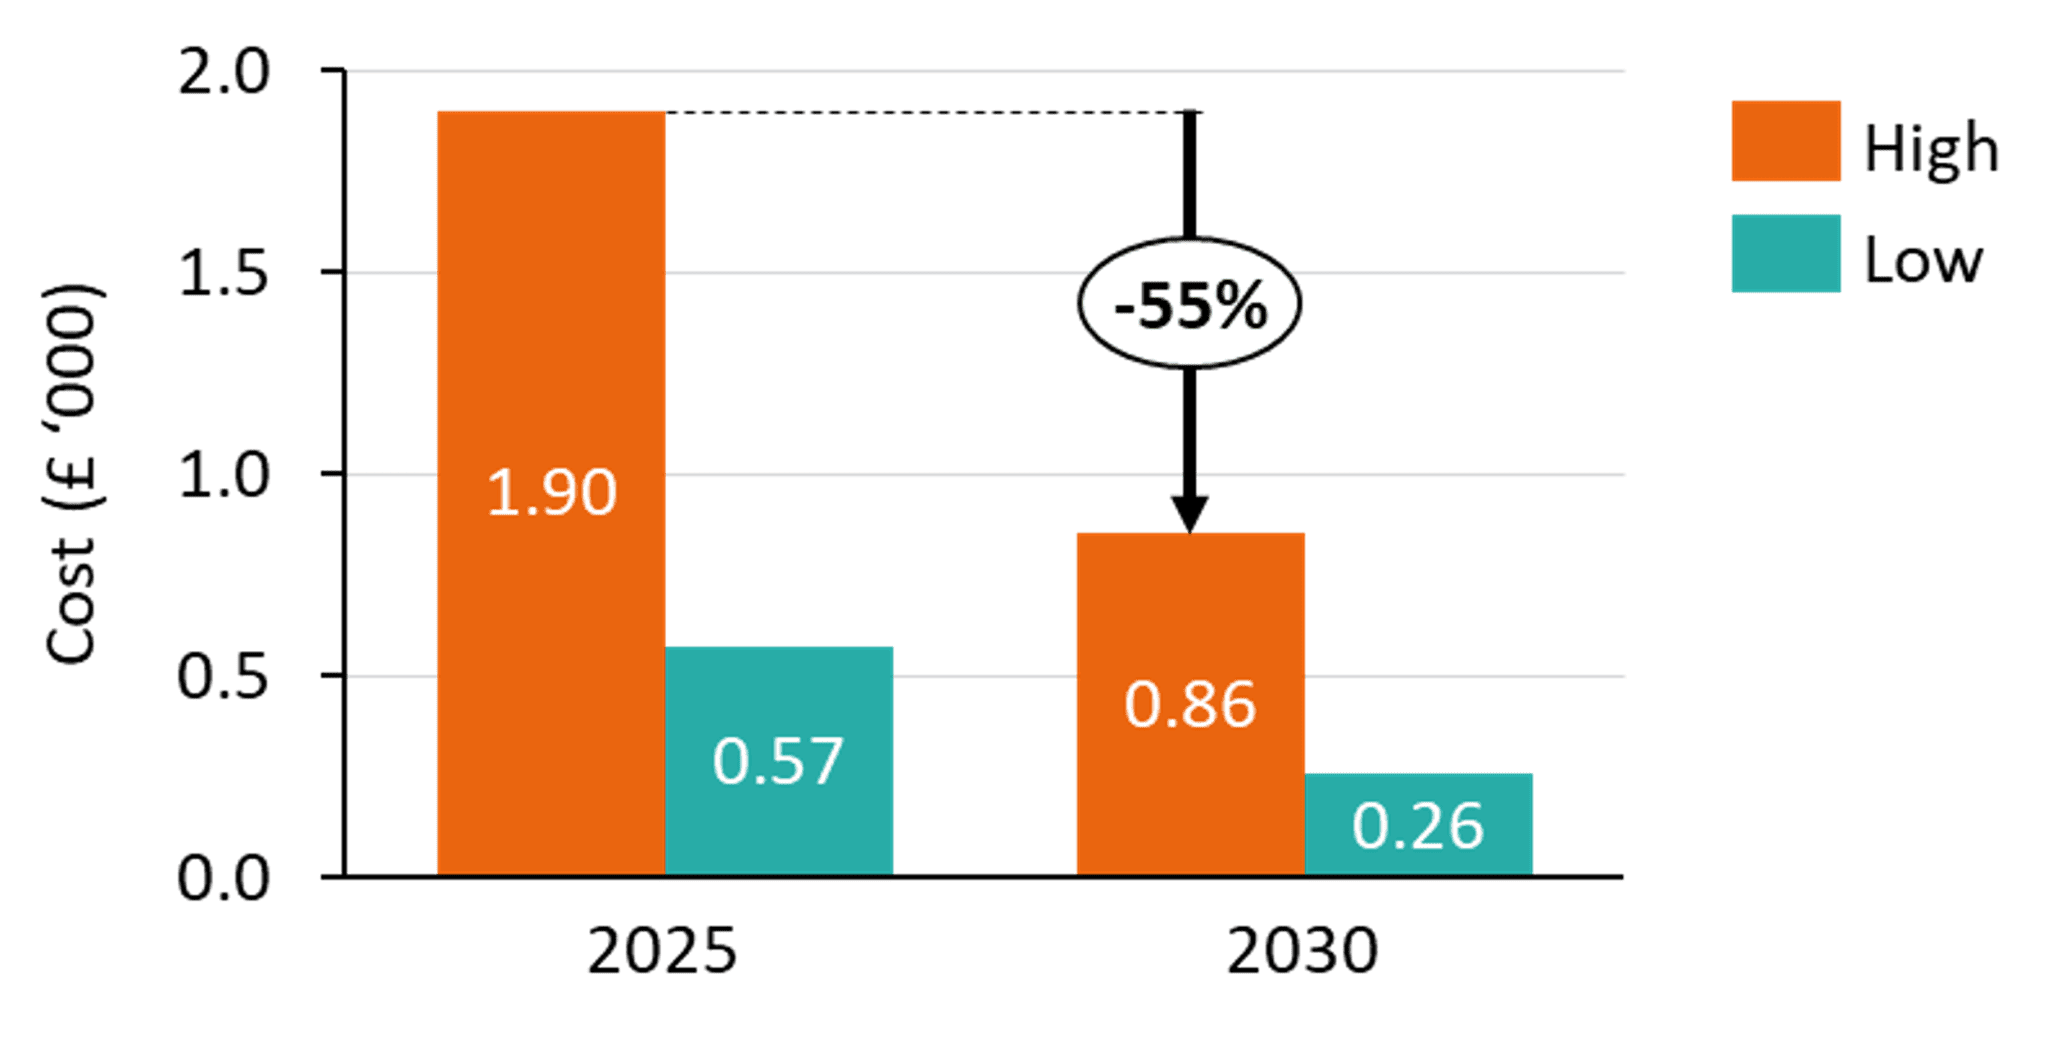 A chart showing the associated costs for hardware and installations for a 7 kW AC charger in 2025 and 2030, respectively. The costs are given in terms the thousands of pounds. In 2025, the high cost is £1,900 and the low cost is £570. In 2030, the high cost is £860 and the low cost is £260. 